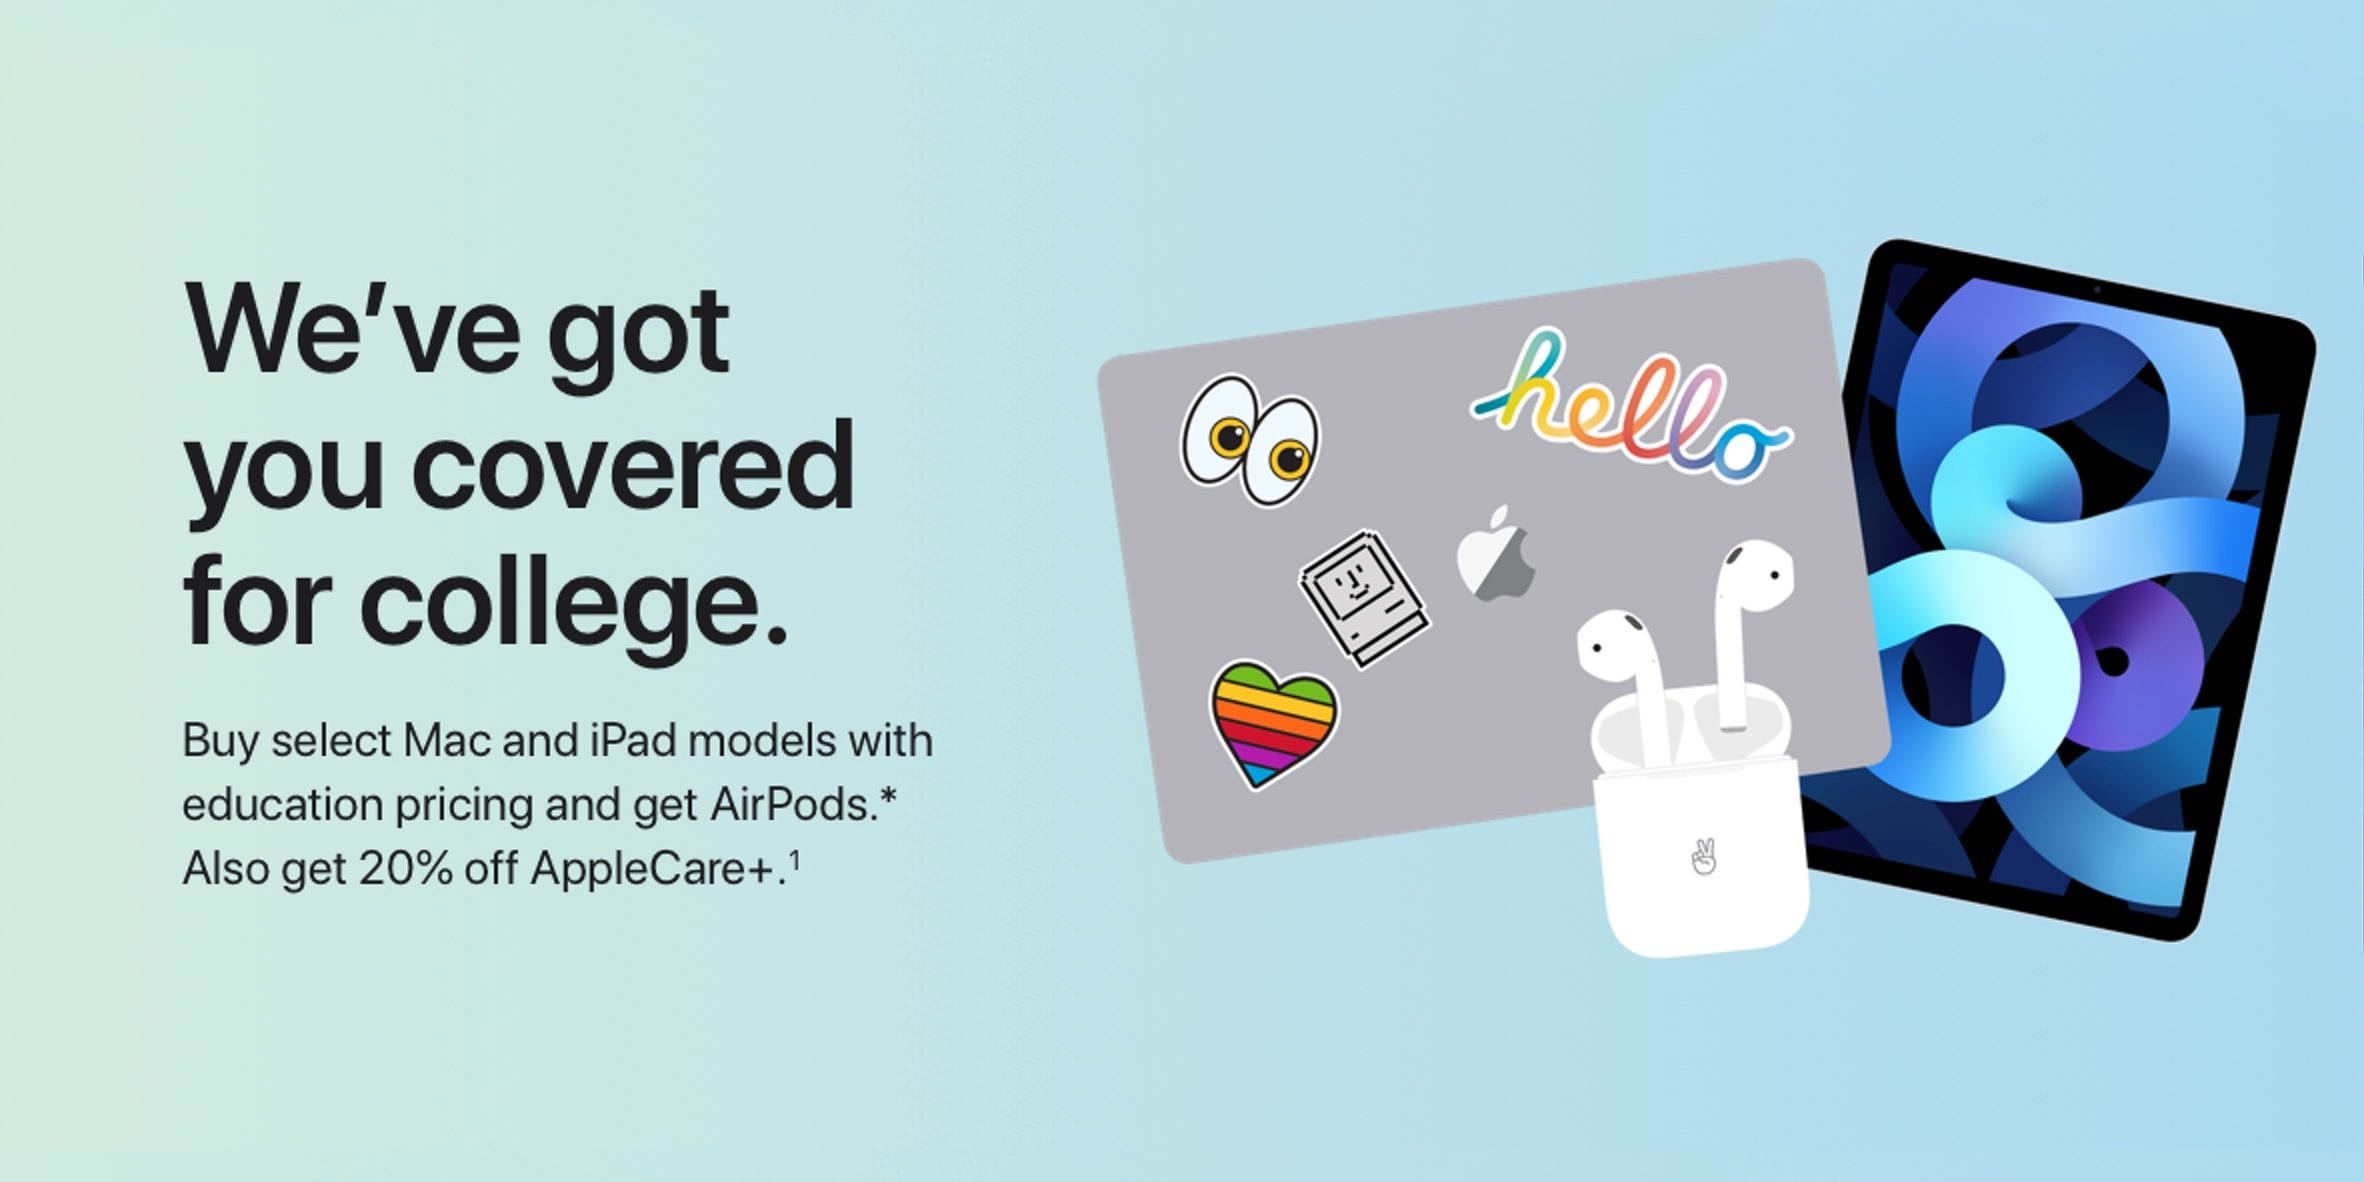 Apple launches Back to School student offer: free AirPods with iPad and Mac purchases - 9to5Mac